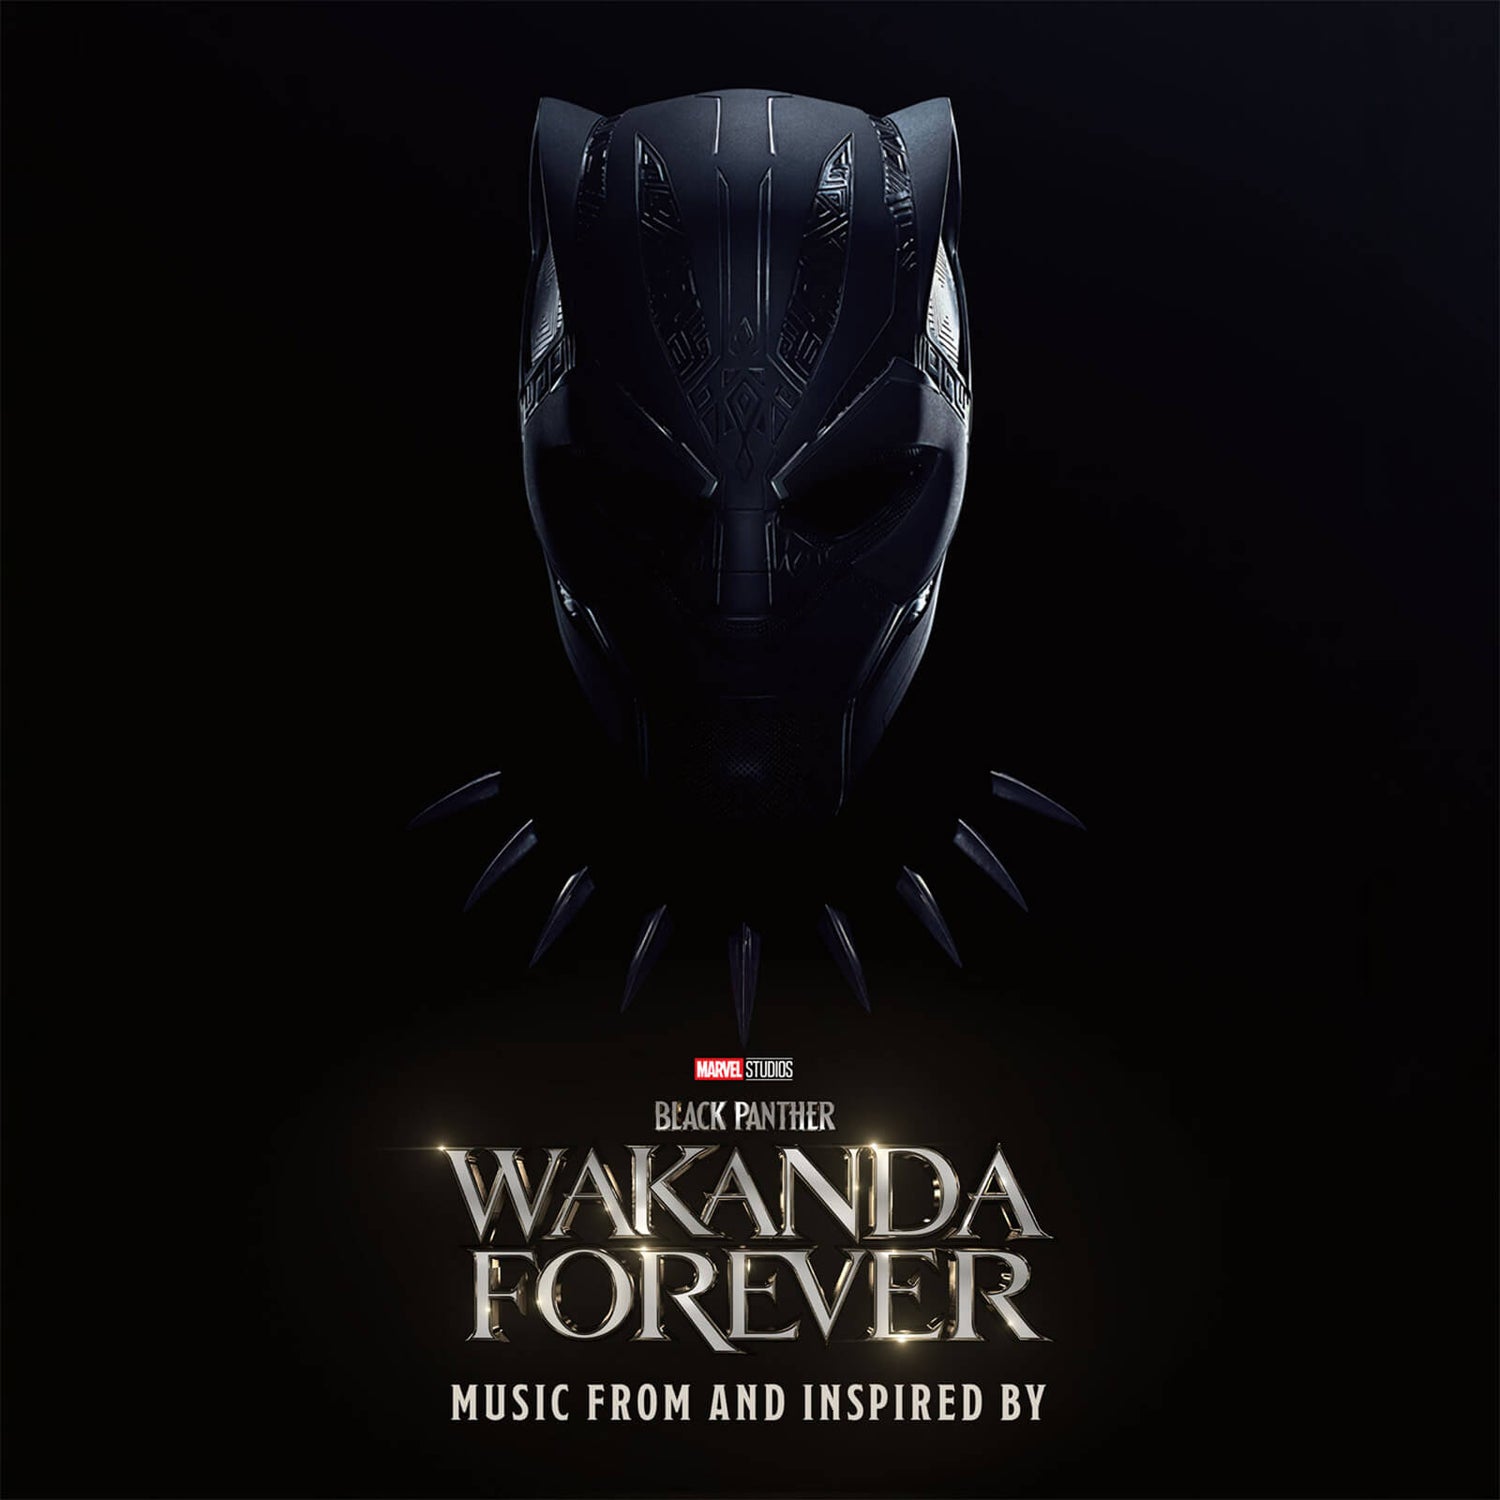 Black Panther: Wakanda Forever Music From and Inspired by Vinyl 2LP